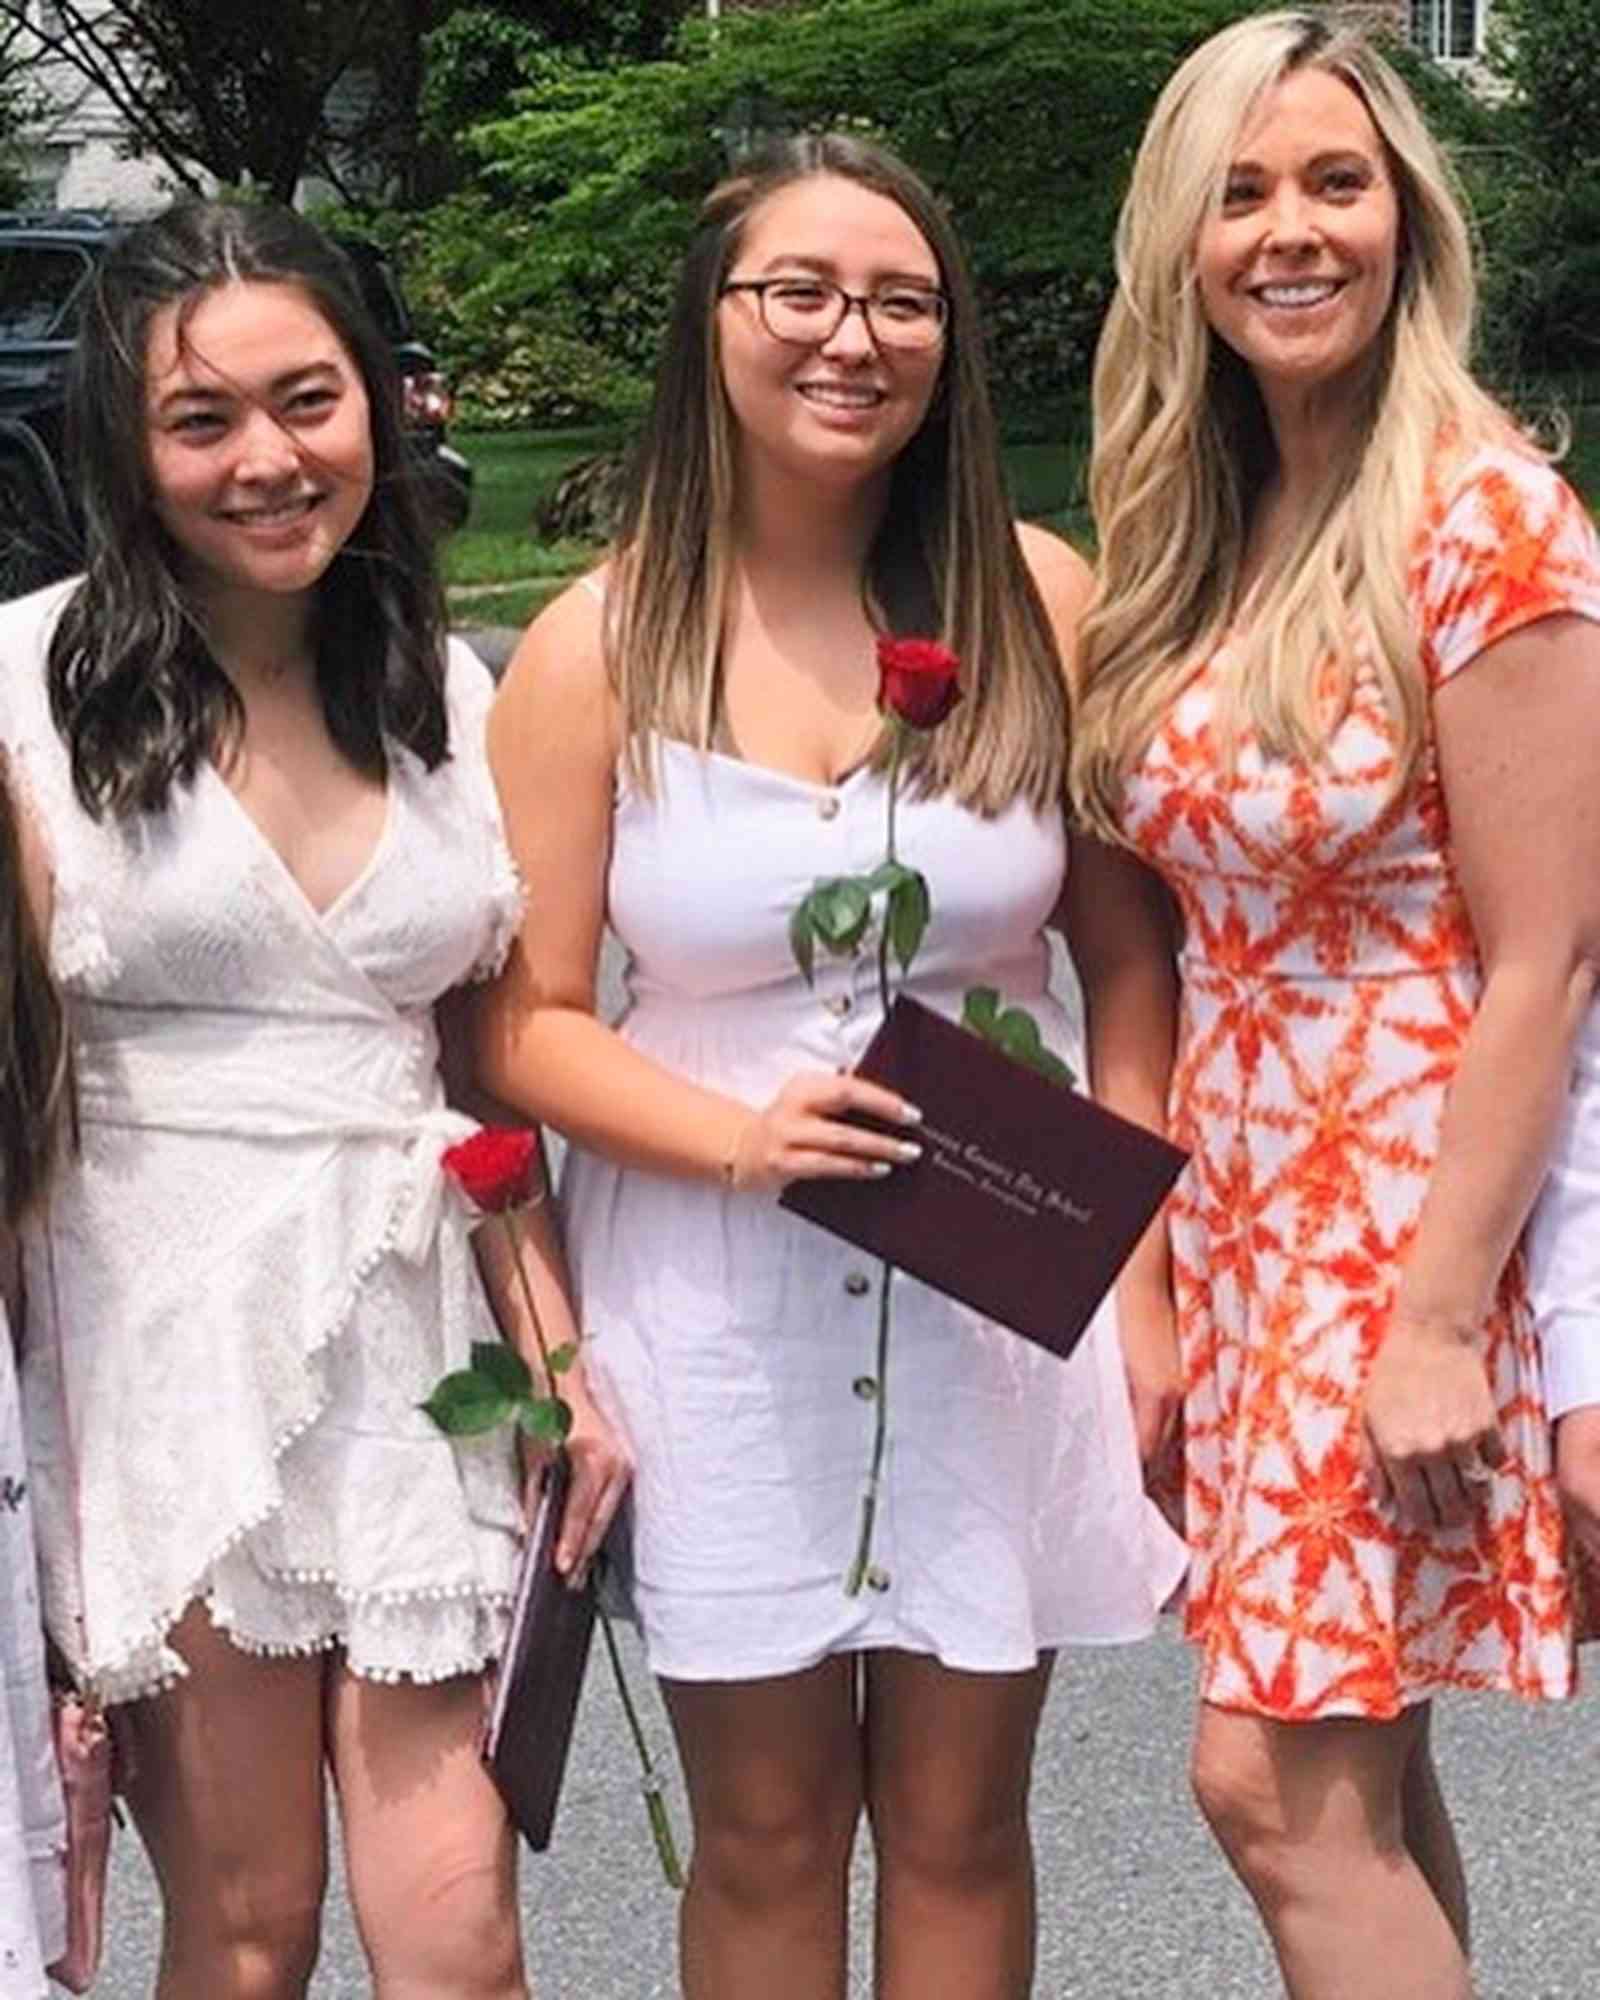 Kate Gosselin Feeling &lsquo;Mixed Emotions' About Mady and Cara Moving Away for College https://www.instagram.com/p/ByEYFWeDd9T/ Kate Gosselin/Instagram